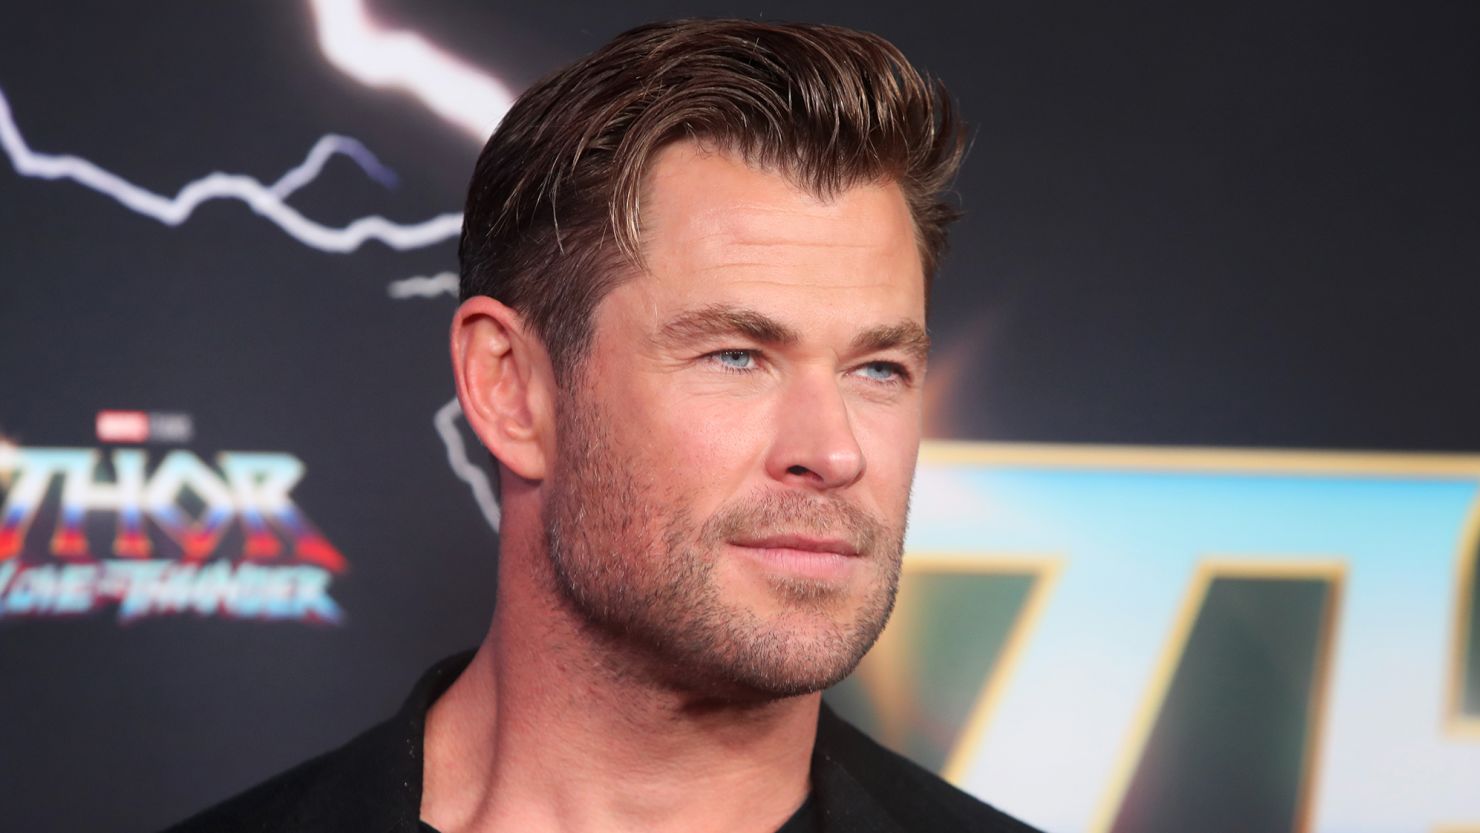 Chris Hemsworth, whose newest film "Thor: Love and Thunder" will be released in early July, reminisced on playing Thor for over 10 years.